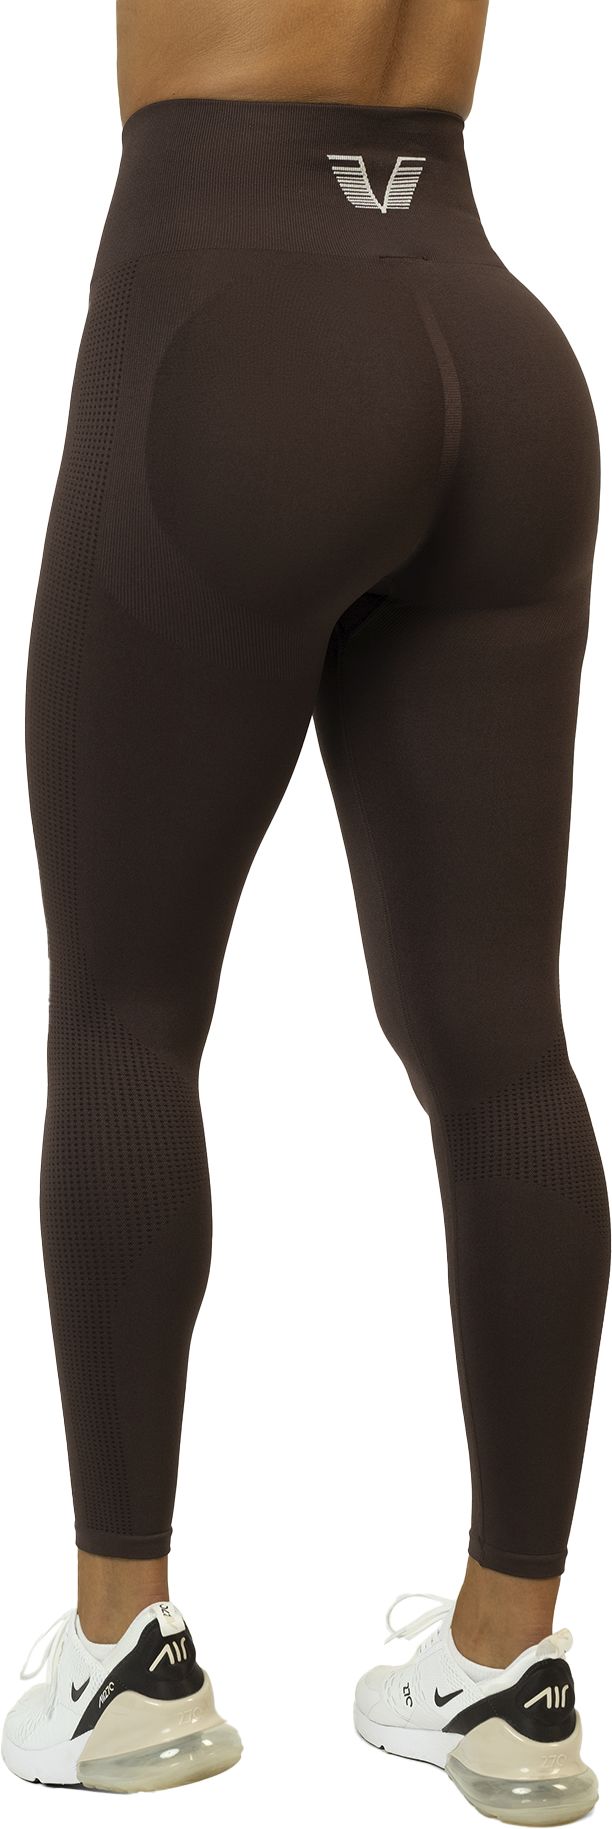 GAVELO, W SEAMLESS BOOSTER TIGHTS